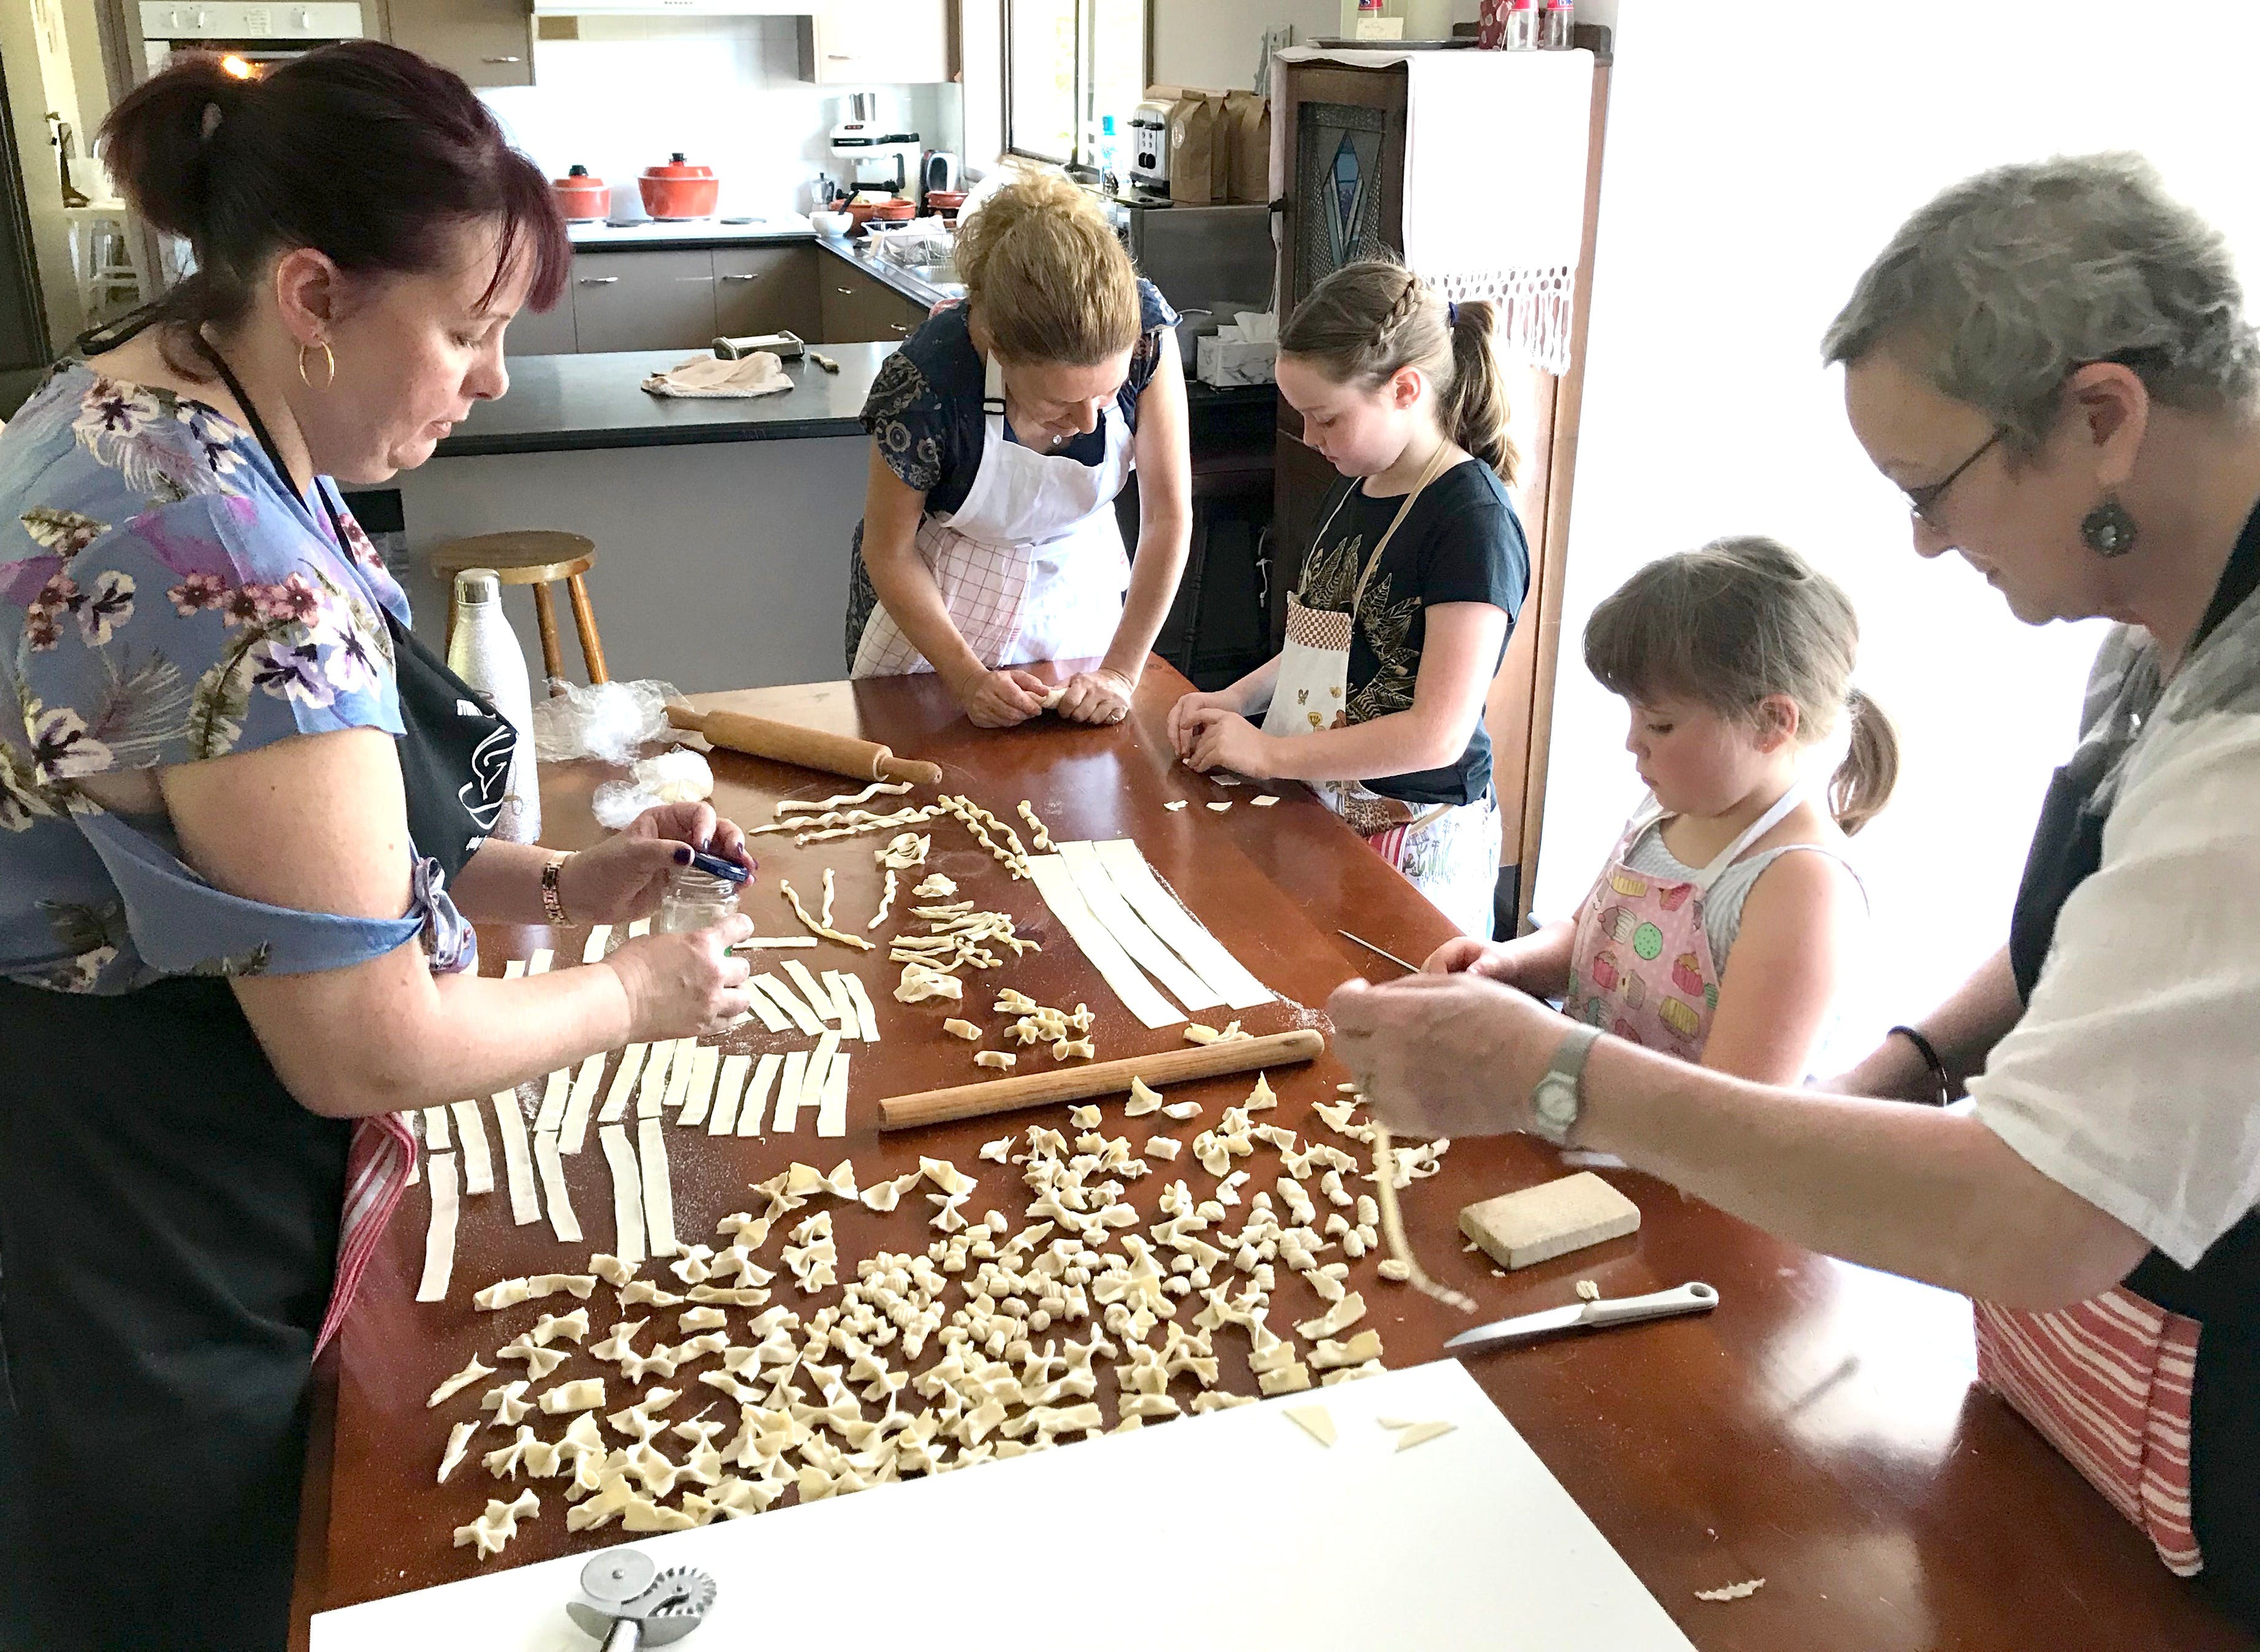 Kids Pasta Making Class - hands on fun at your house - Melbourne Tourism